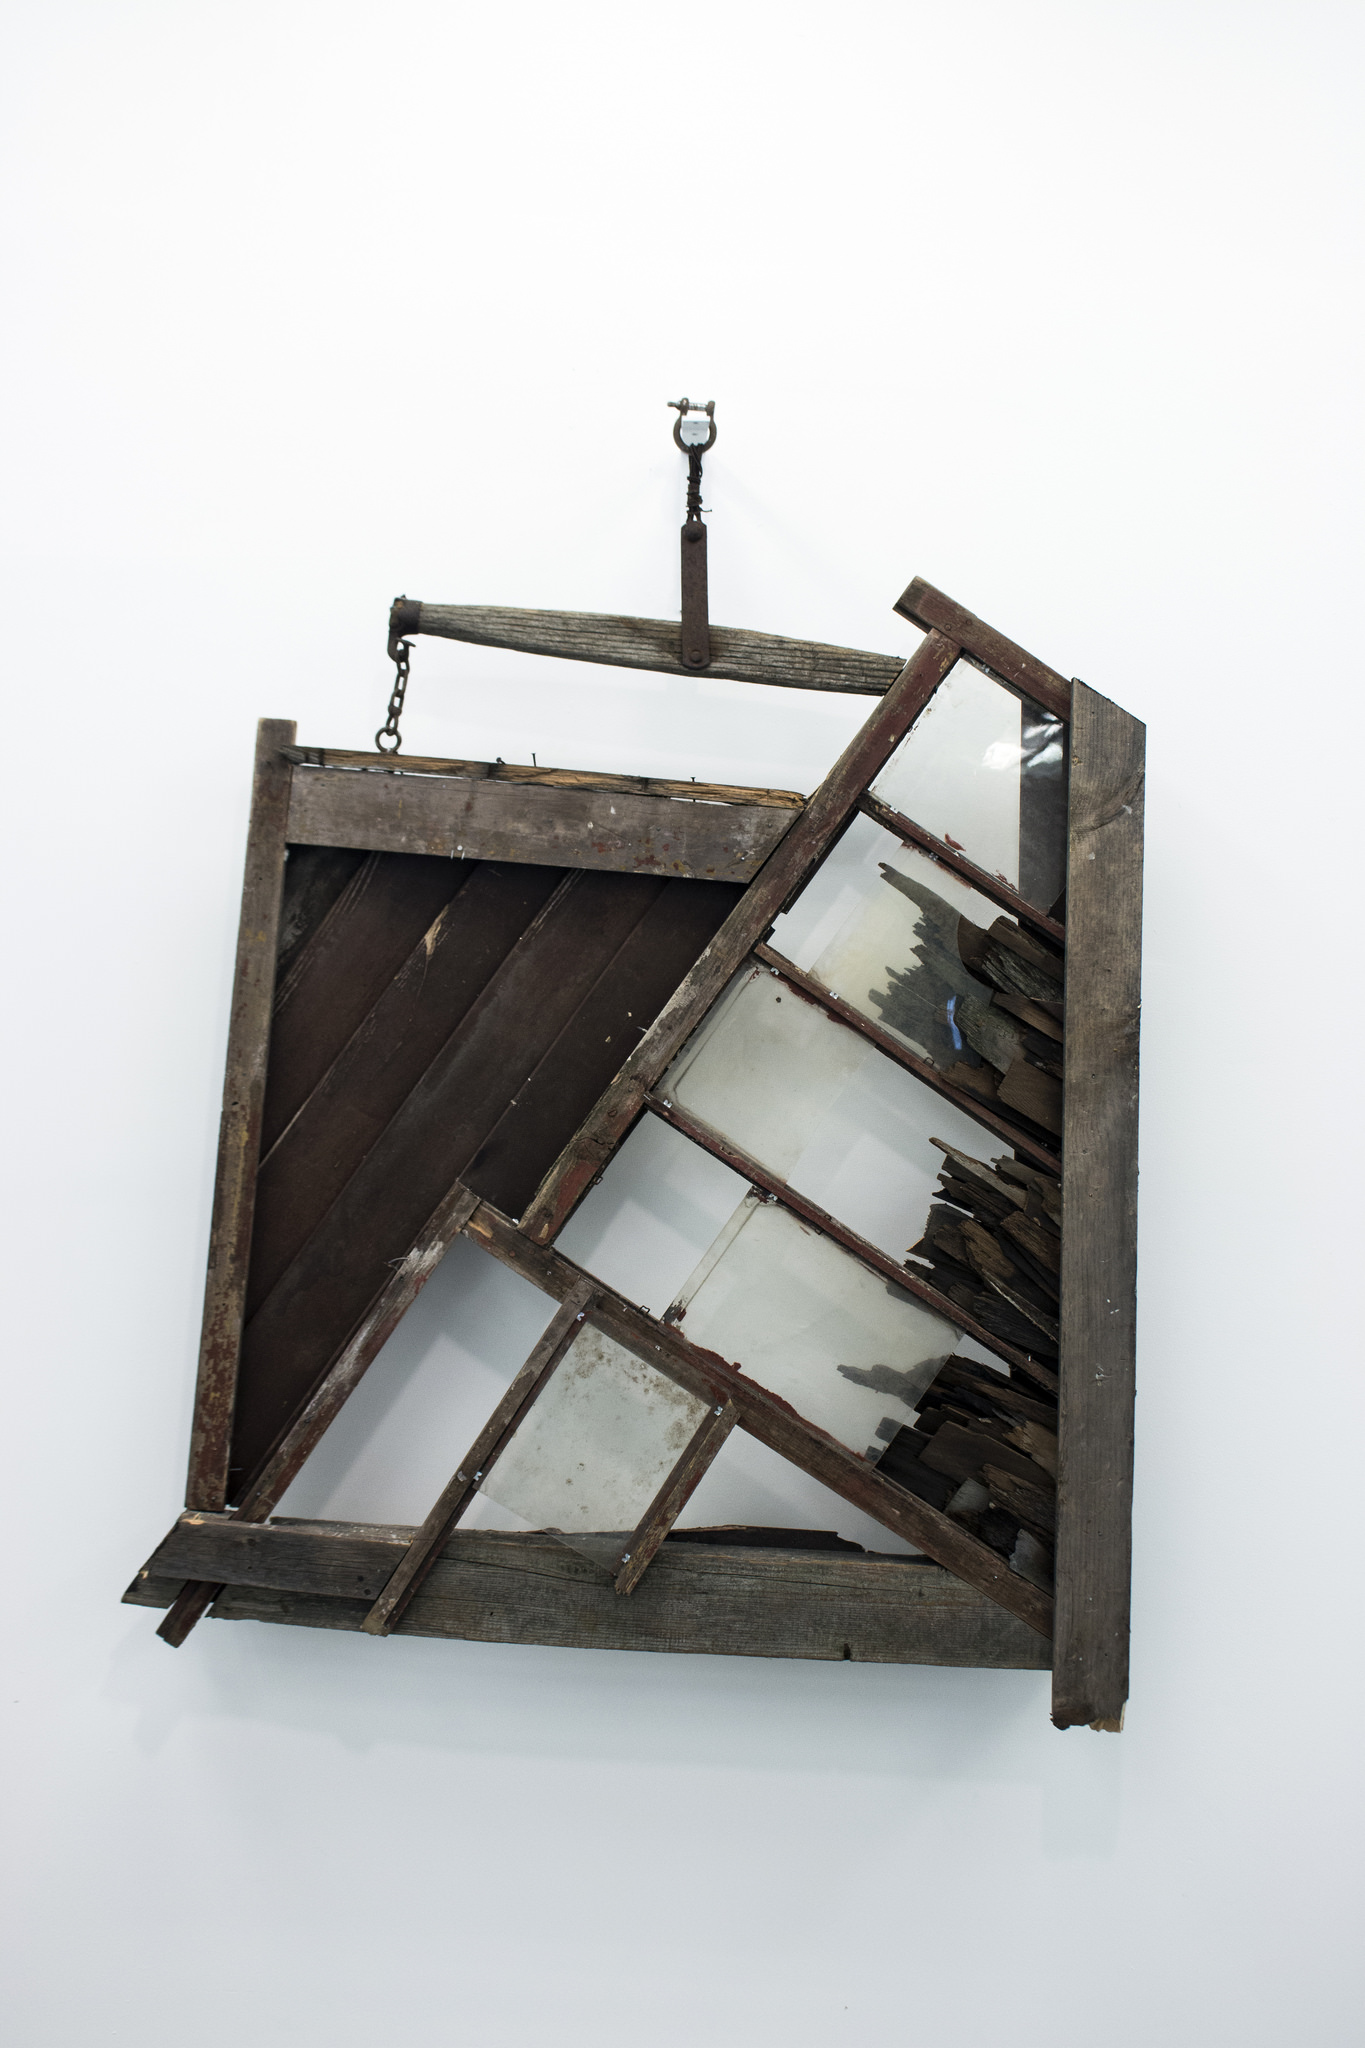  “Mended Pieces,” Benjamin Quesnel’s tobacco farm barn refuse assemblage, substantial and solid, yet precariously hung, at first seems wistful for a past Americana, but then turns cynical as we gaze through a window looking onto an opaque white wall.